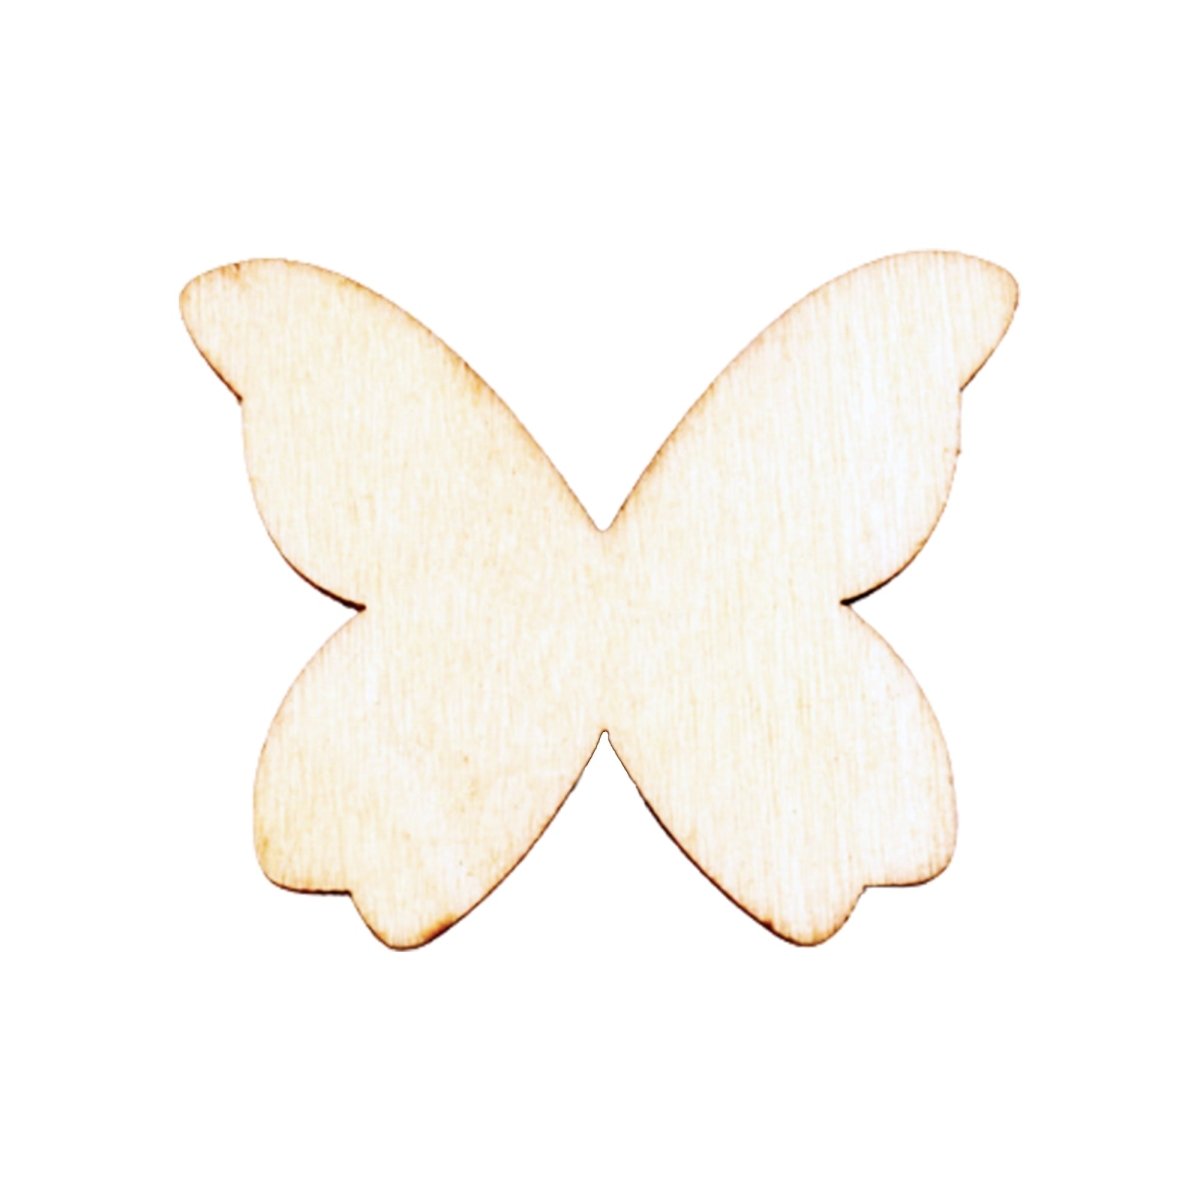 50pcs 15-40mm Natural Wooden Flower Butterfly Shape Blanks Forms Scrapbooking Crafts Sketching - 30mm Butterflies - - Asia Sell